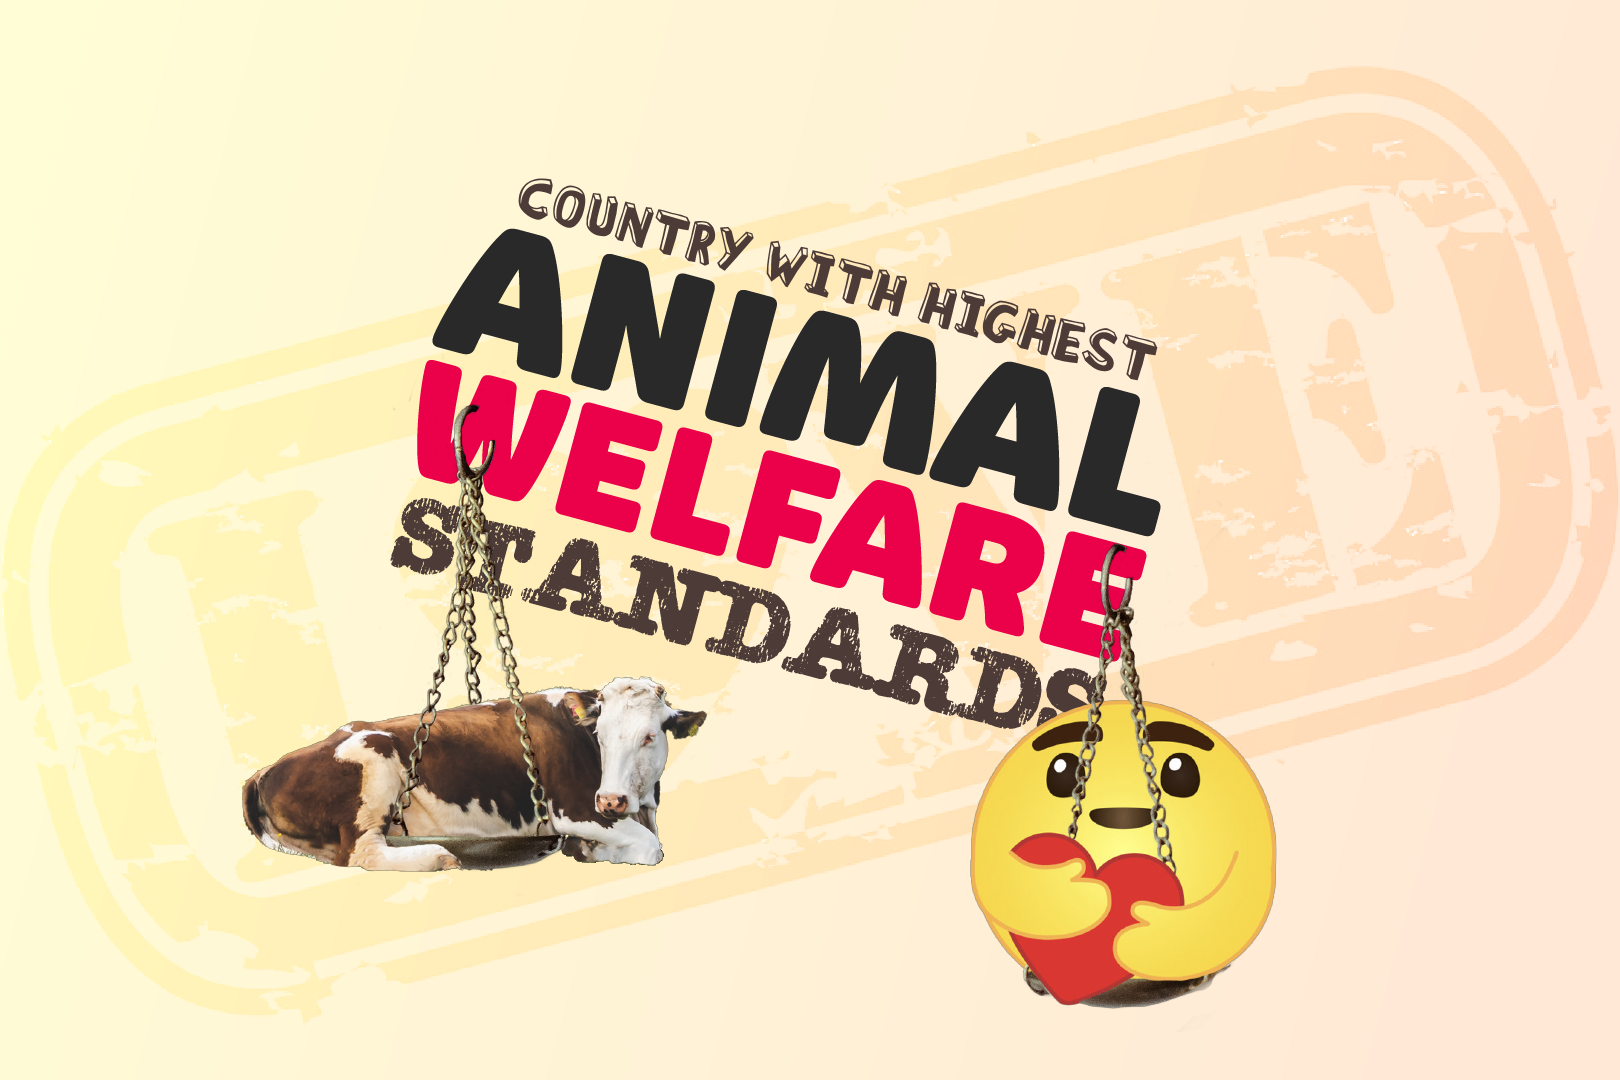 Country with highest animal welfare standards revealed